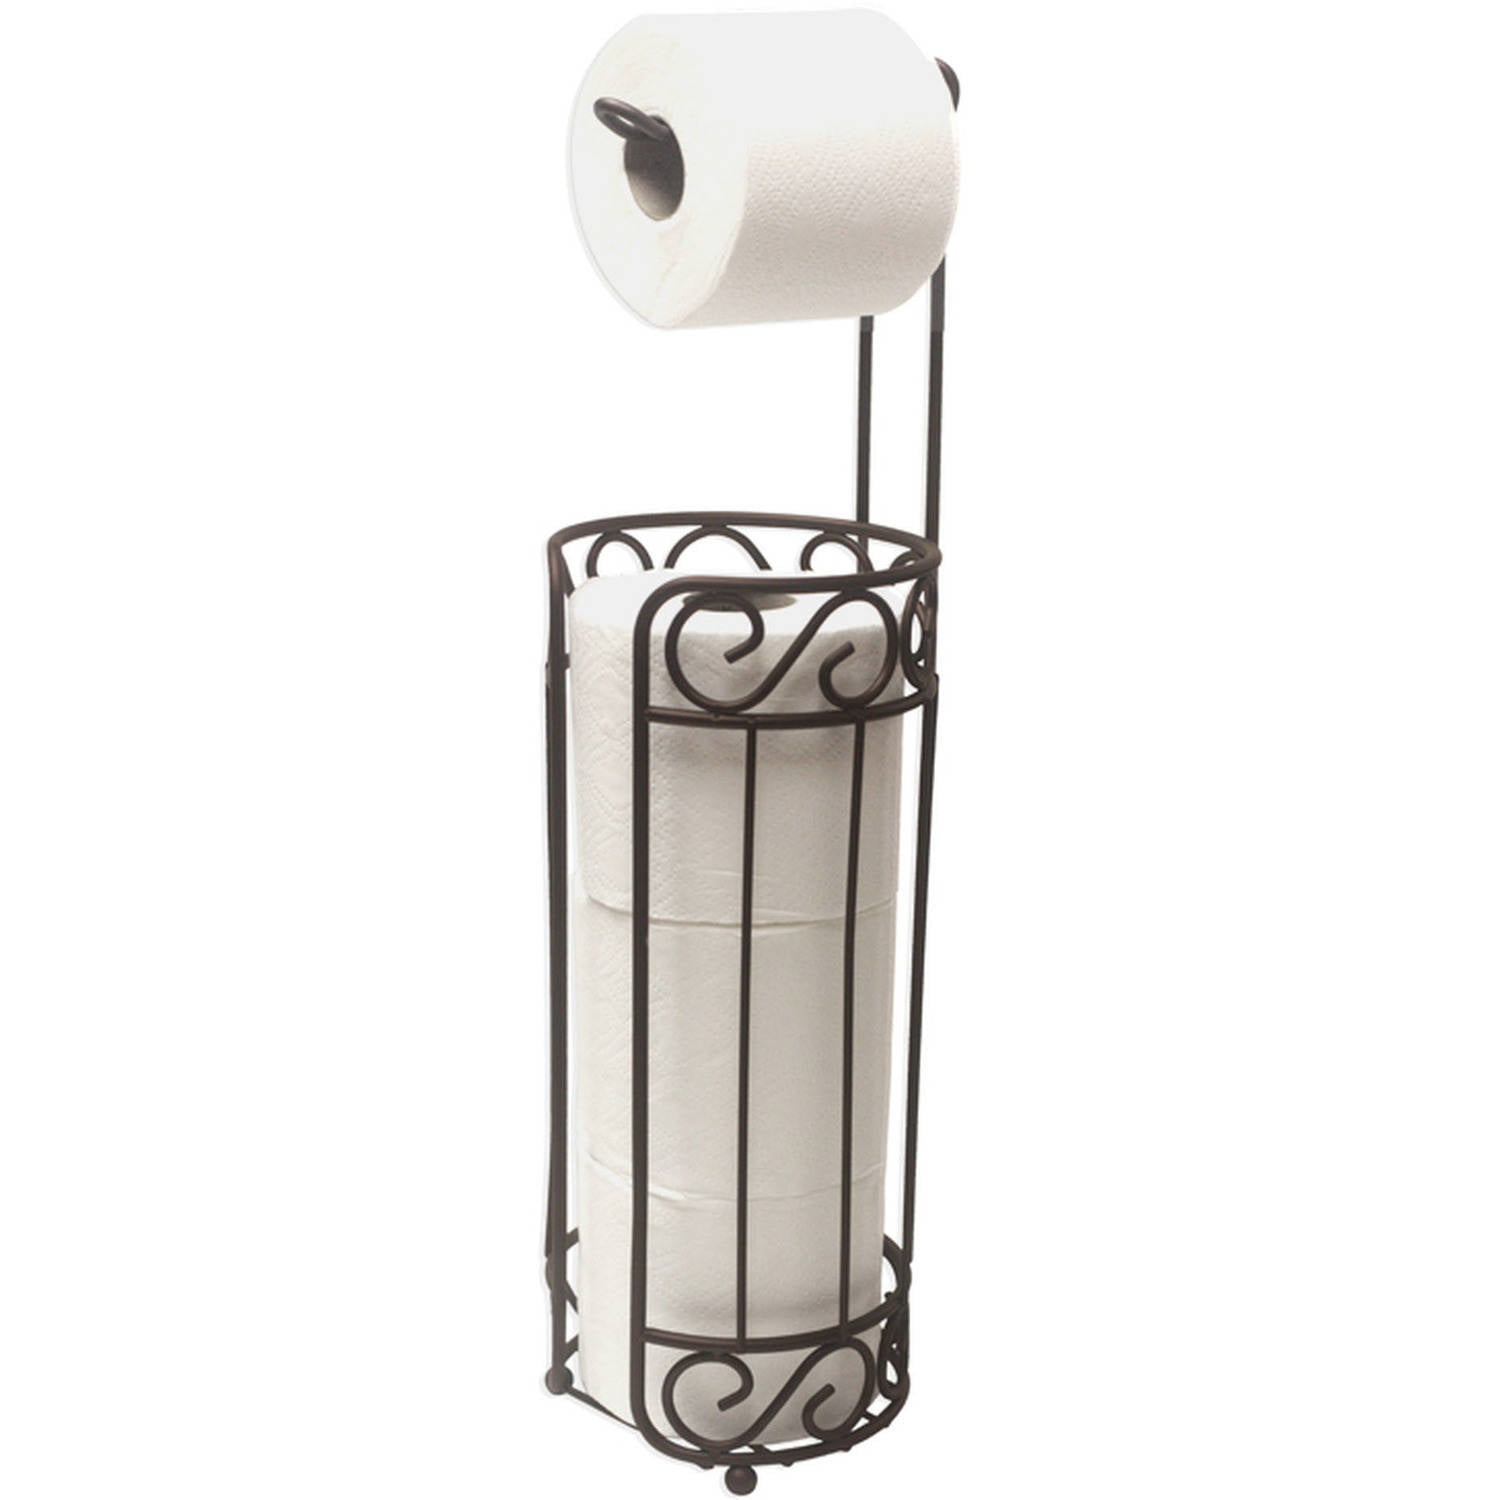 Park Supply of America 01-1864S Recessed Toilet Paper Holder